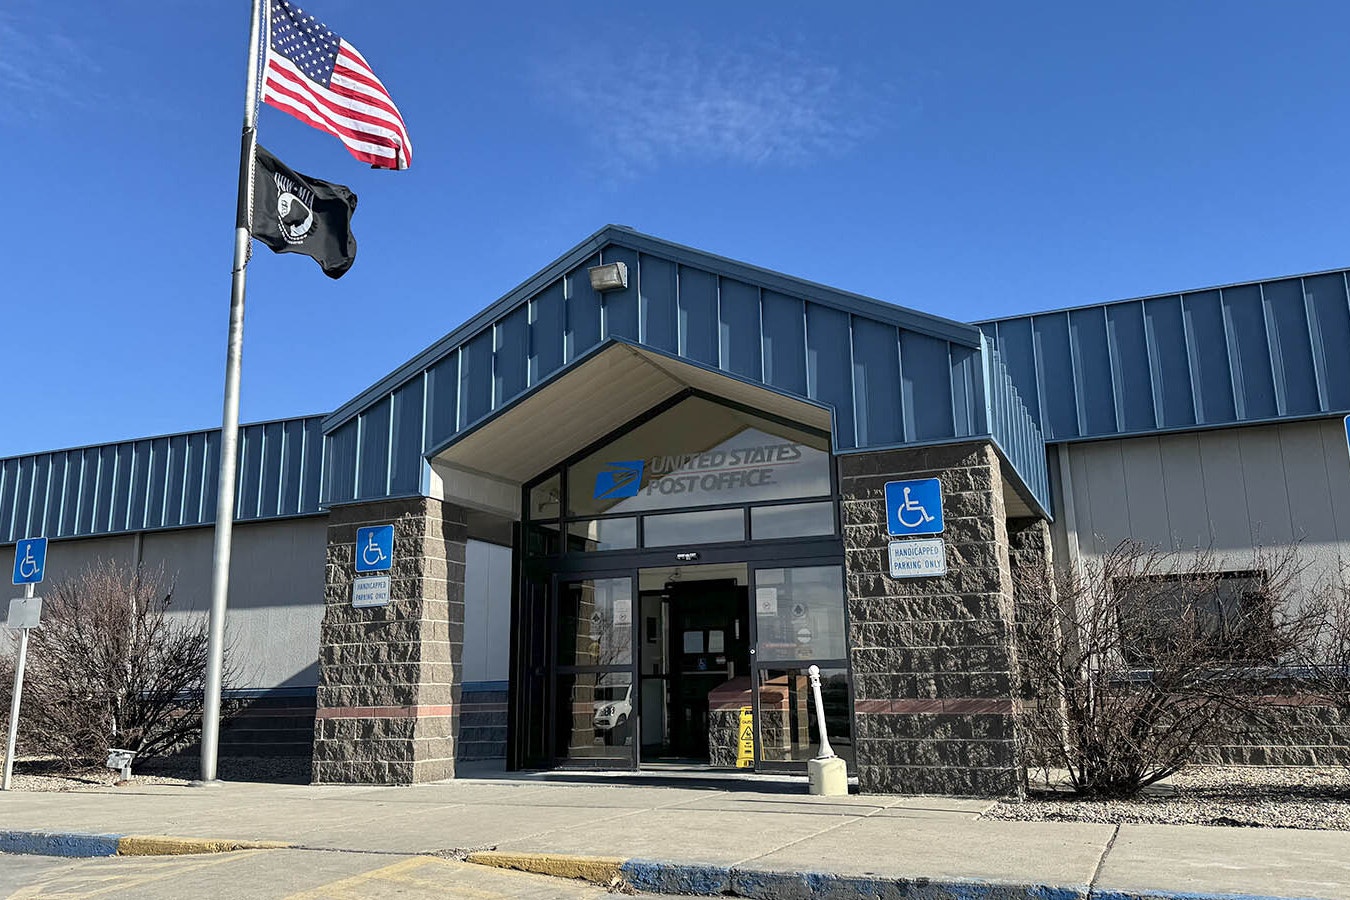 The U.S. Postal Service is studying whether some mail services should be moved from the Casper Post Office to Montana.